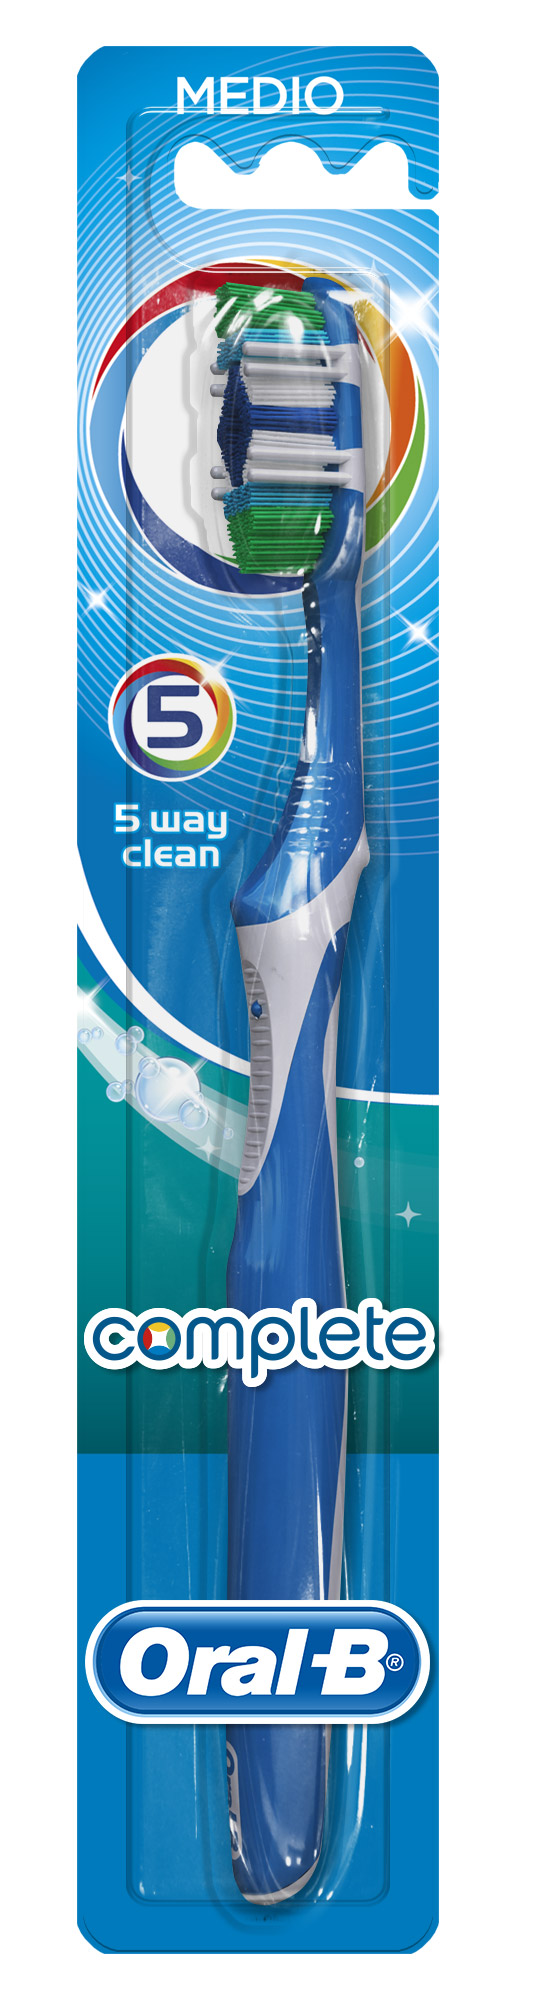 Image of Oral-B(R) Complete 5 Way Clean 40 Medio Spazzolino Manuale